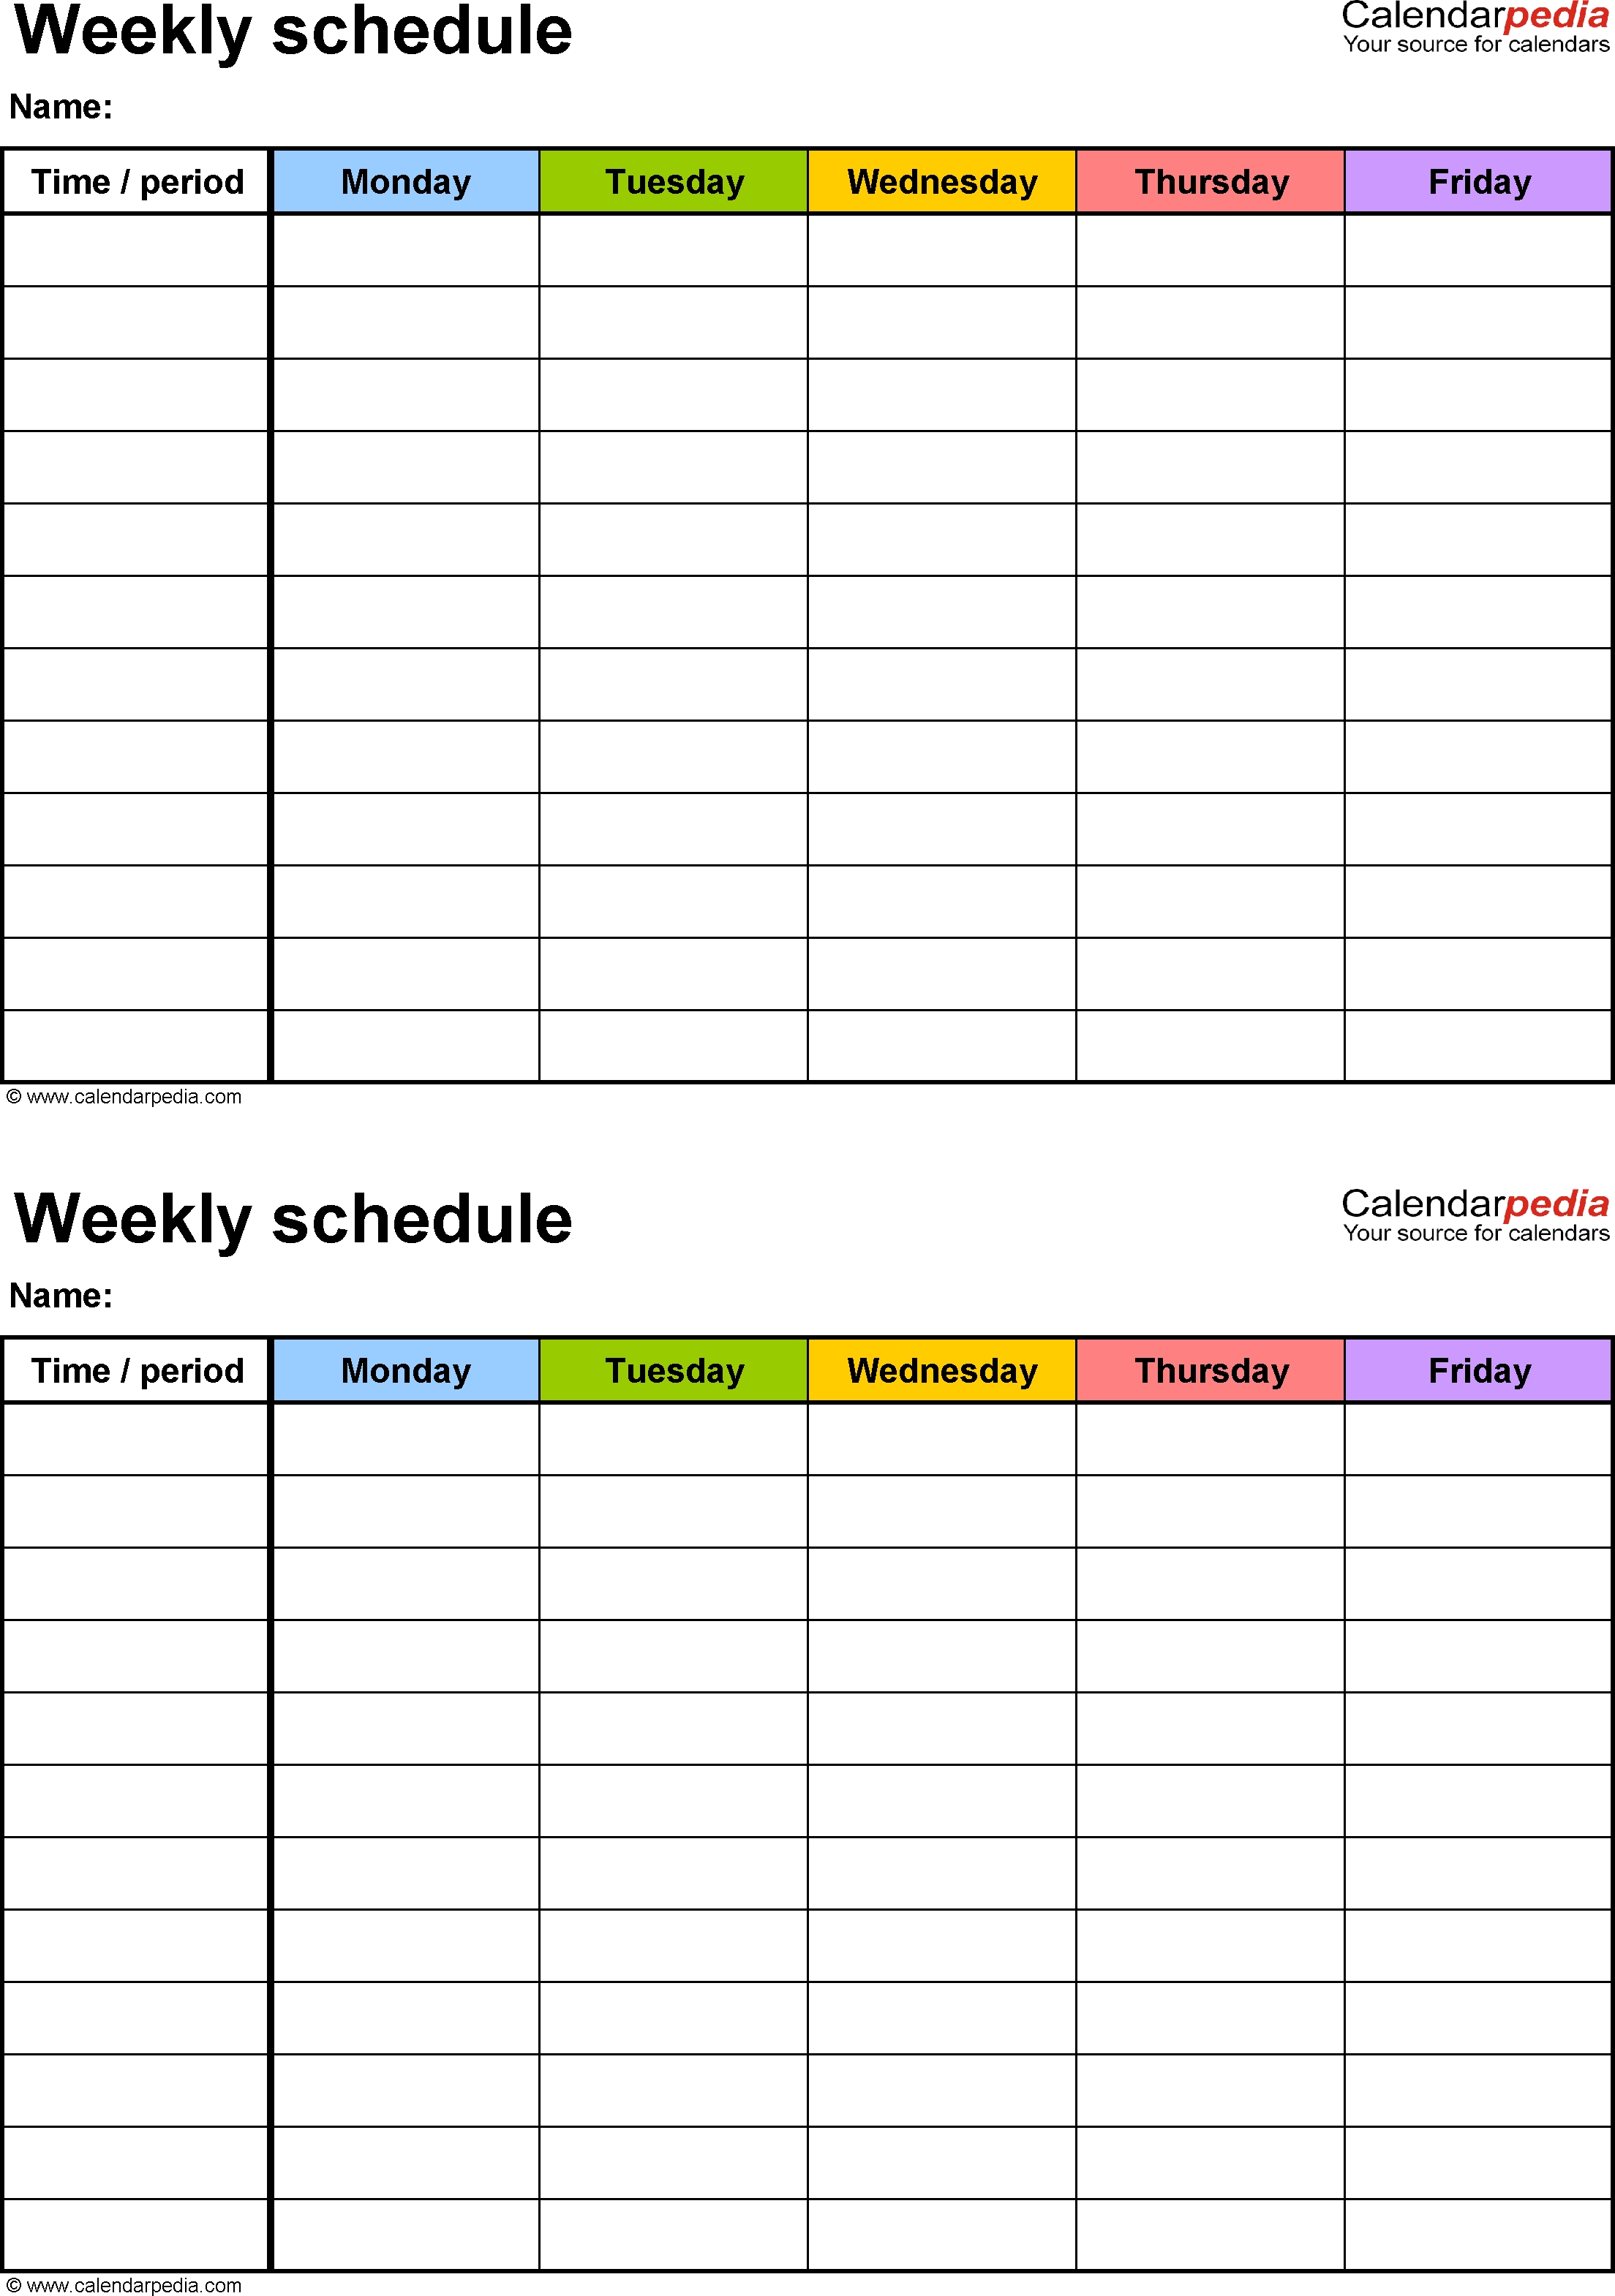 Free Weekly Schedule Templates For Word - 18 Templates-Two Week Schedule Template